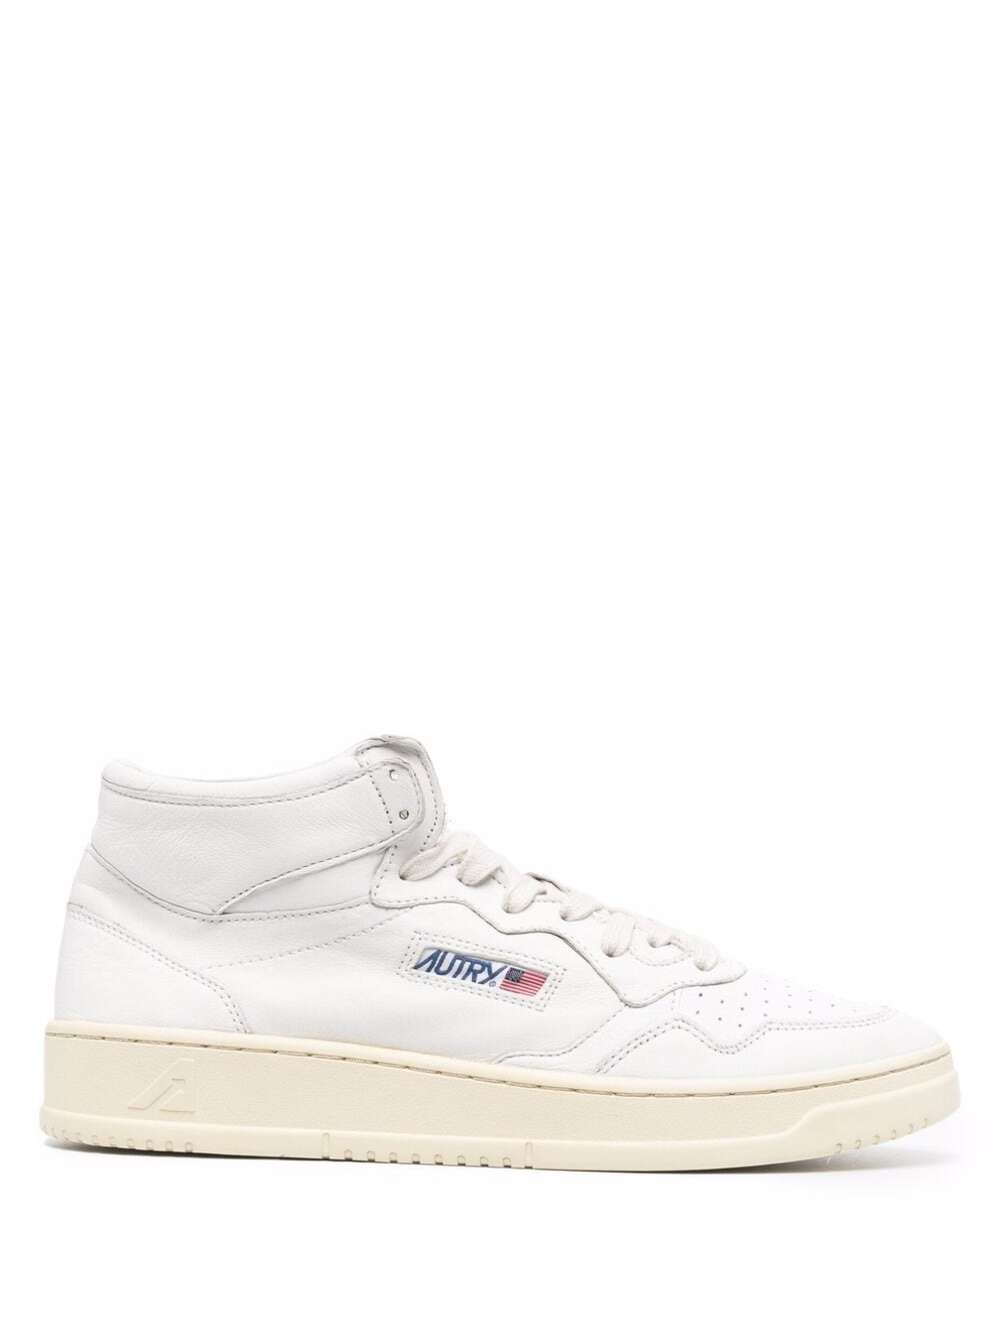 Hig Top White Leather Sneakers With Logo Autry Man